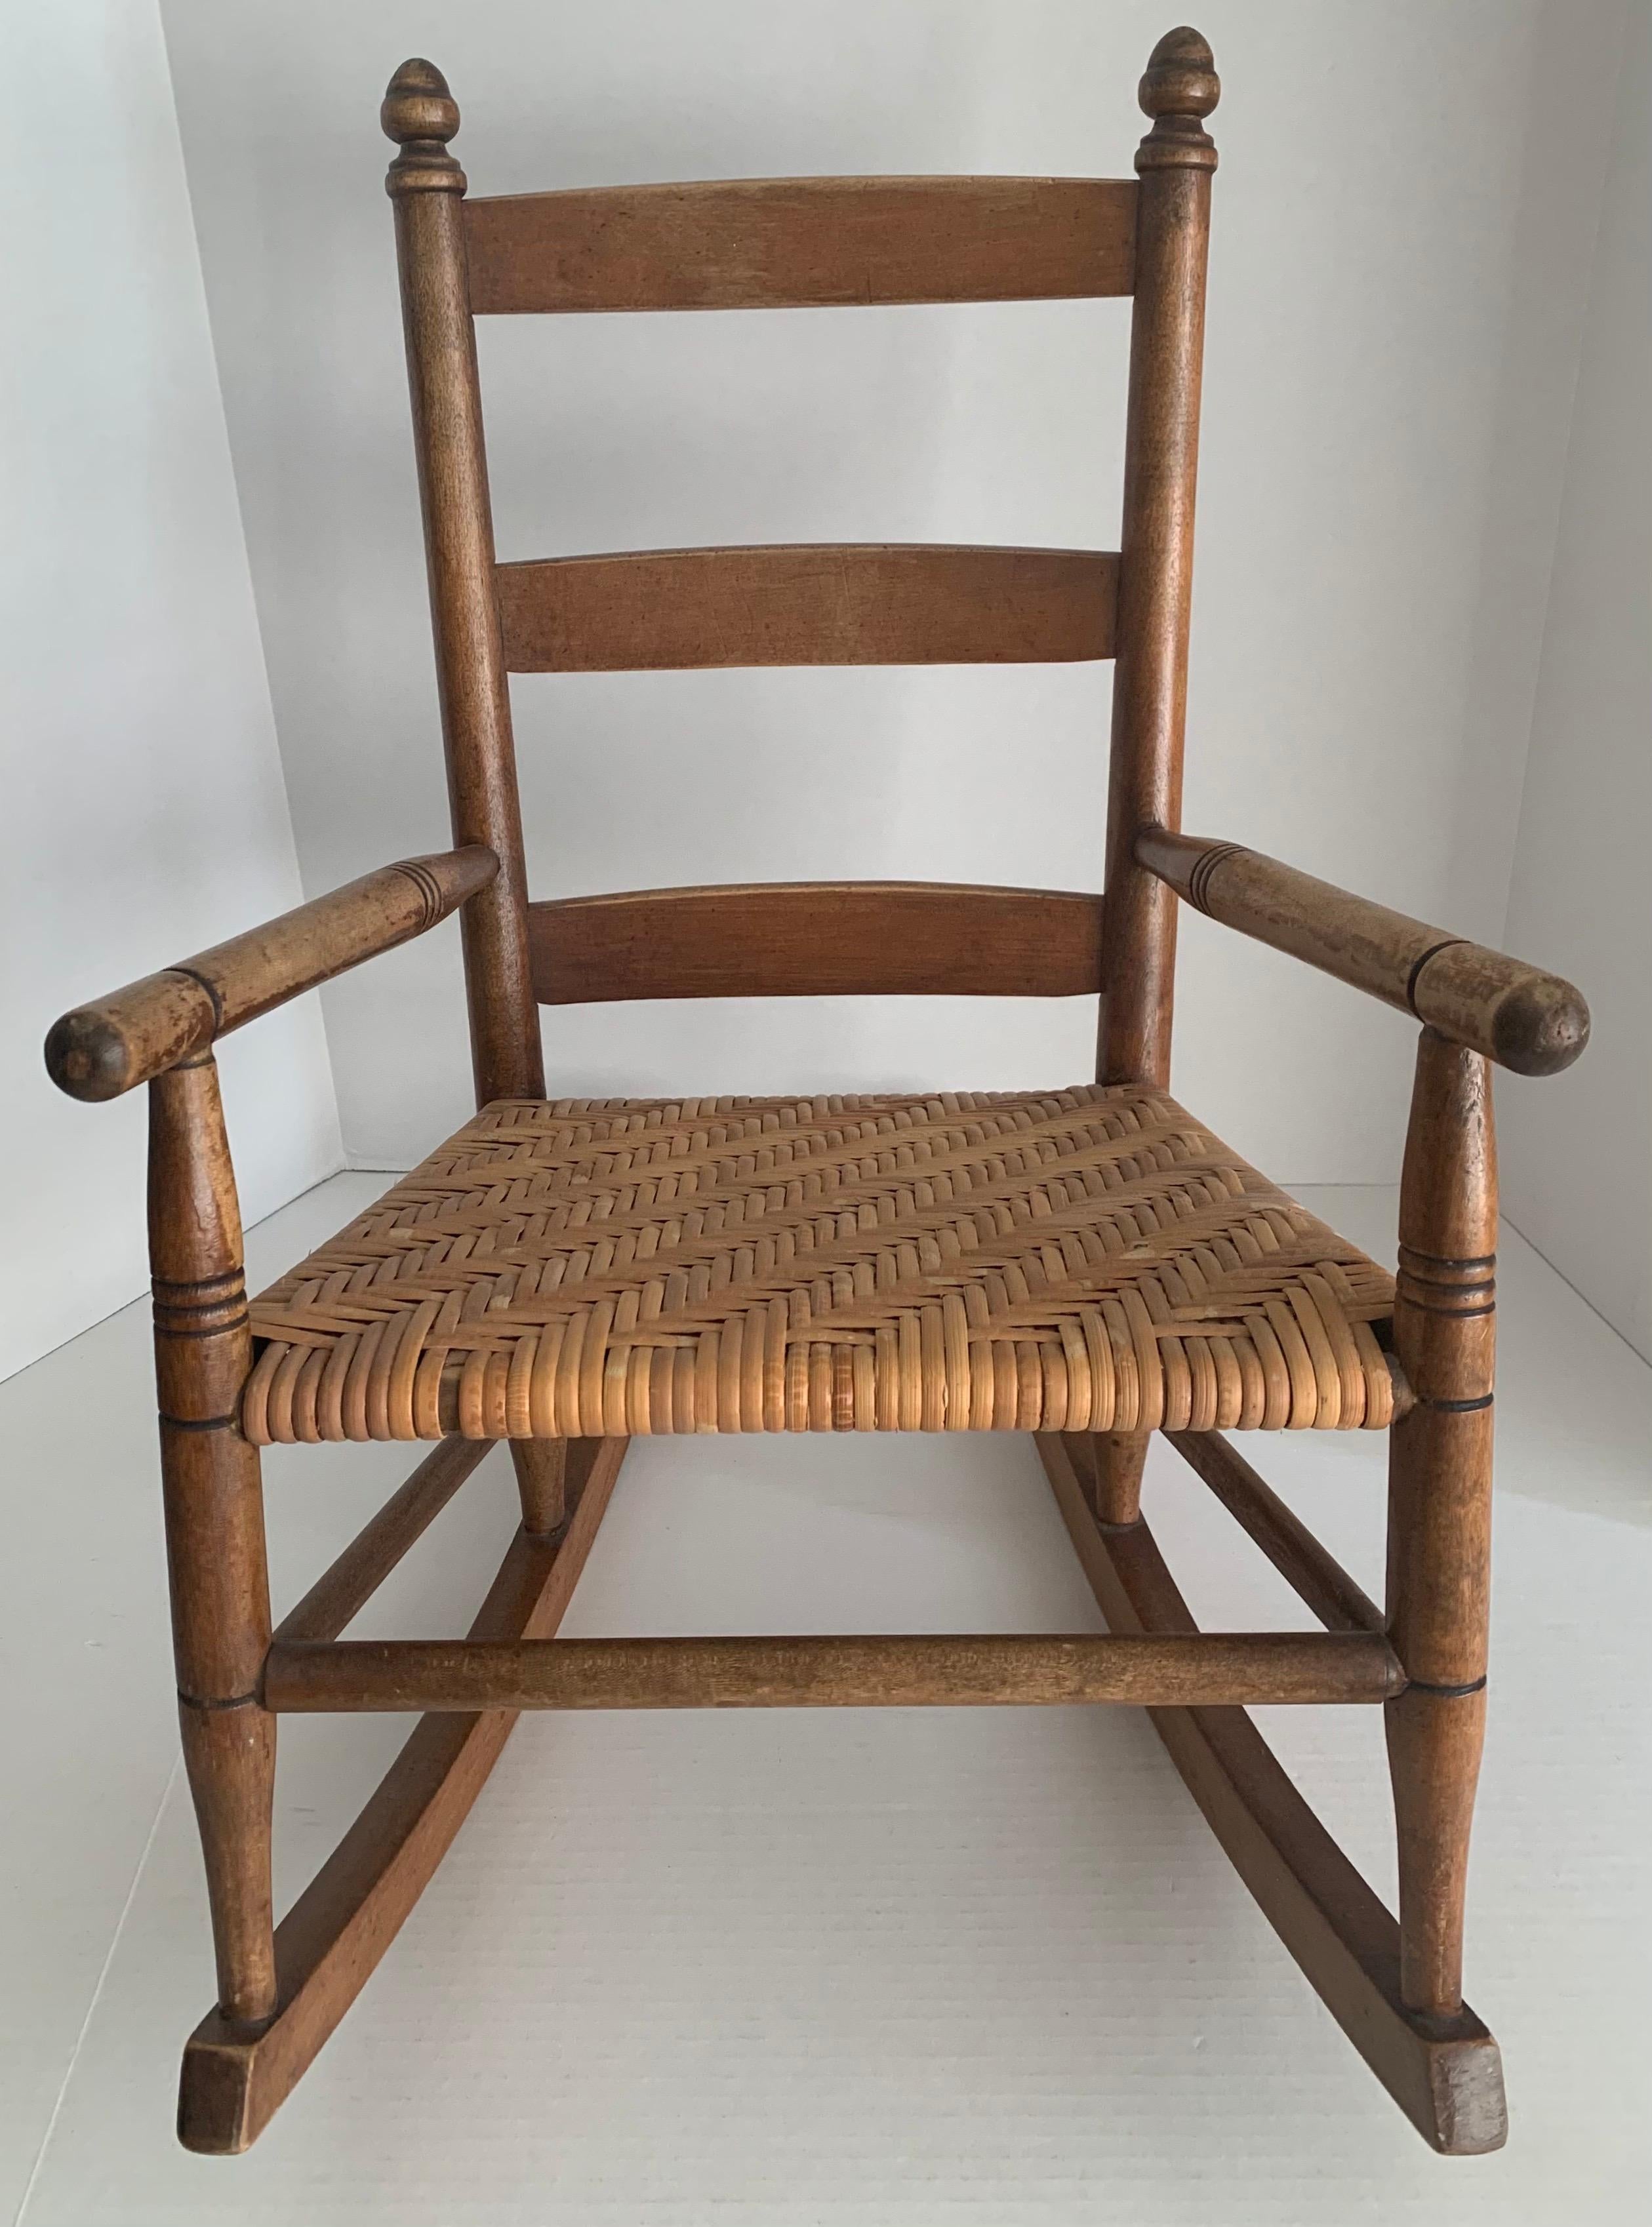 1950s rustic style children’s rocking chair. Original caned seat. Chair is structurally sound. Seat is 13.5” width x 11” deep.
 